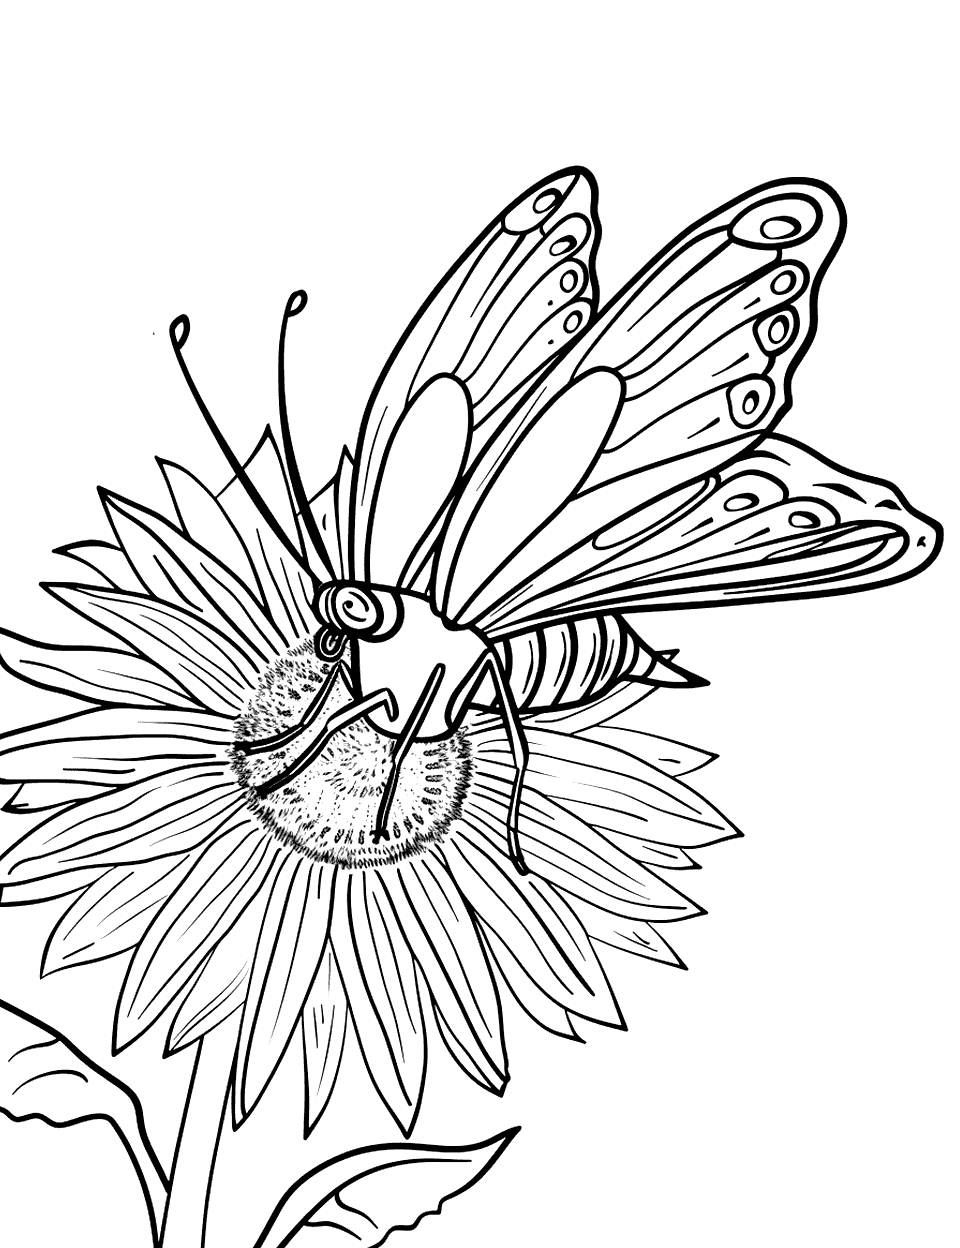 Butterfly on a Sunflower Insect Coloring Page - A butterfly gently landing on the petals of a sunflower.